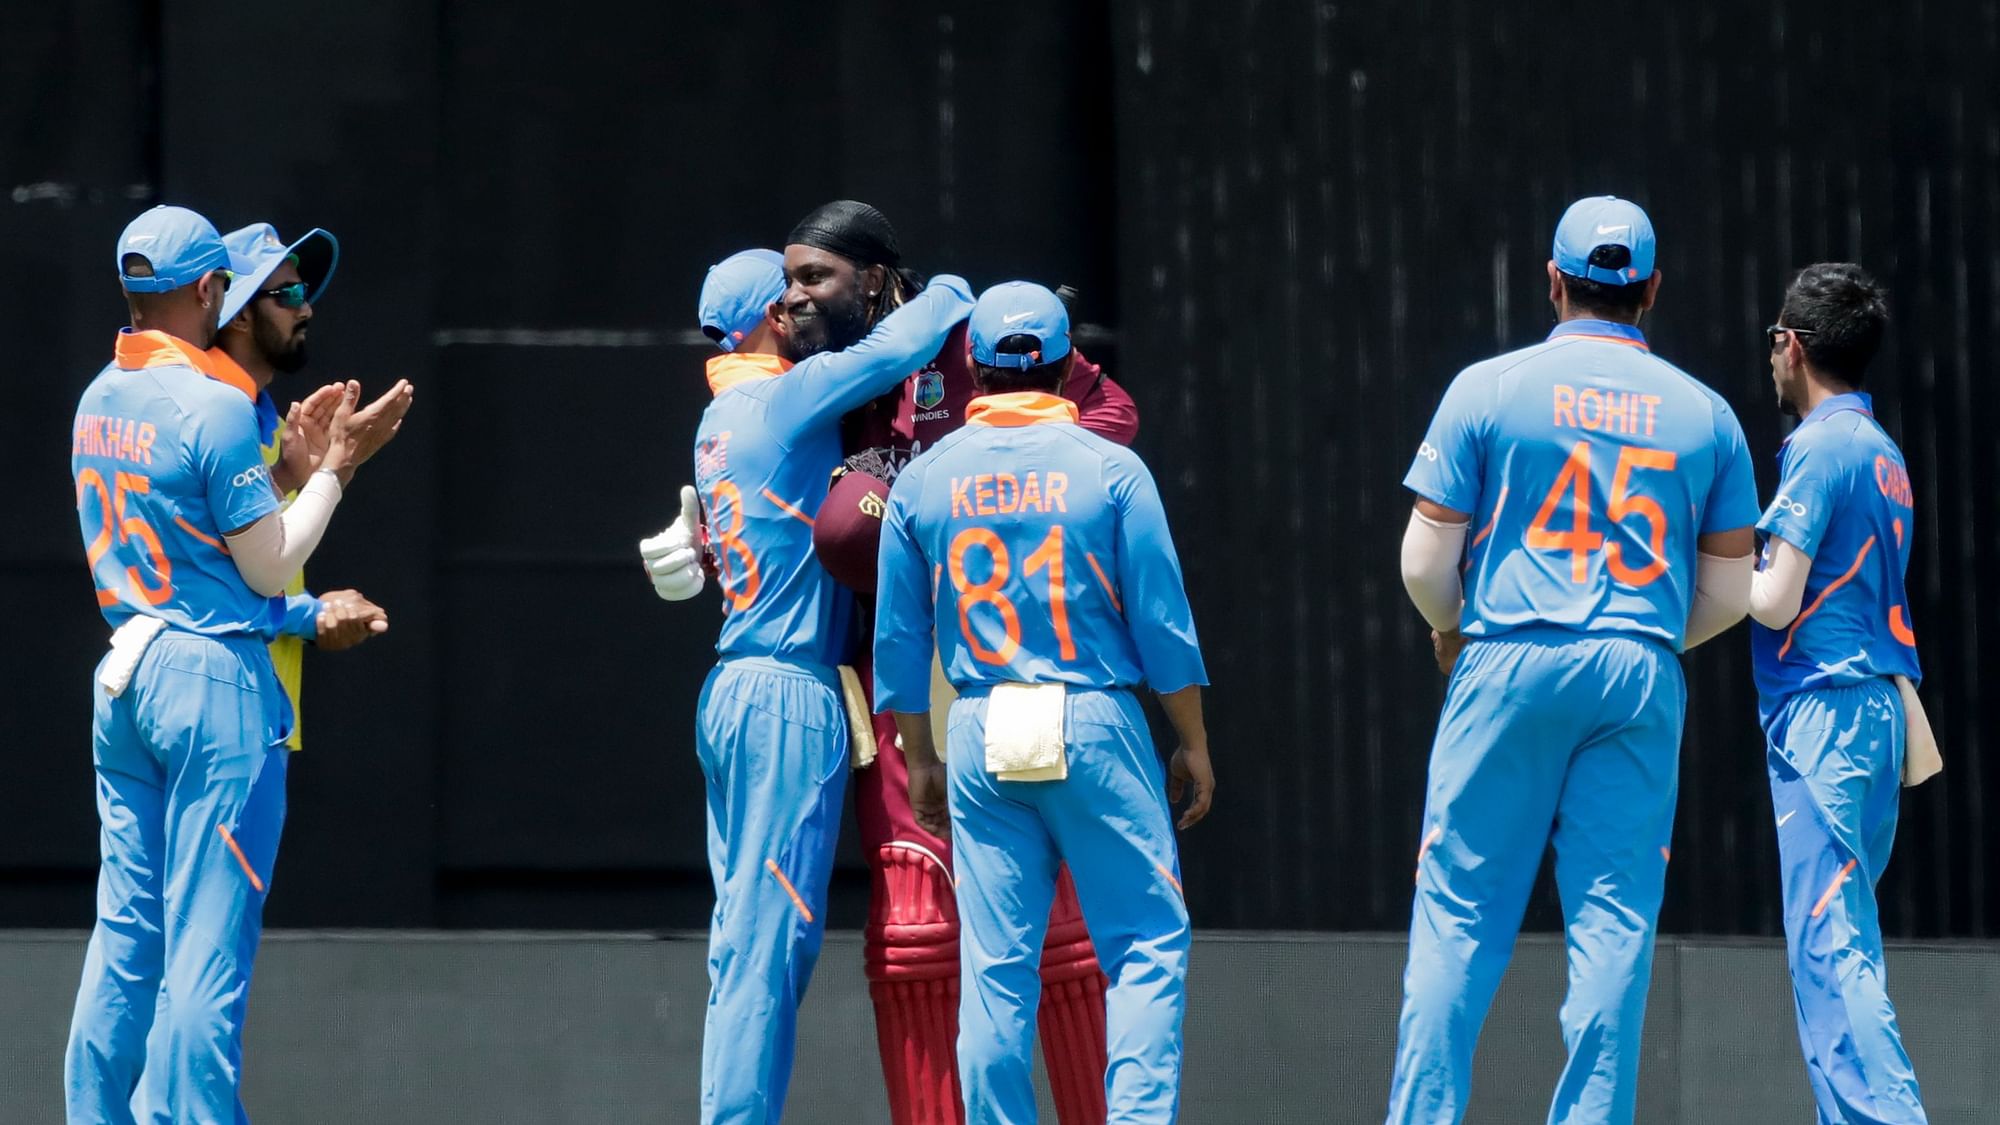 West Indies opening batsman Chris Gayle, fourth left, is congratulated by India captain Virat Kohli, third left, after Gayle was caught out by Kohli for 72 runs during their third One-Day International cricket match in Port of Spain, Trinidad, Wednesday, Aug. 14, 2019.